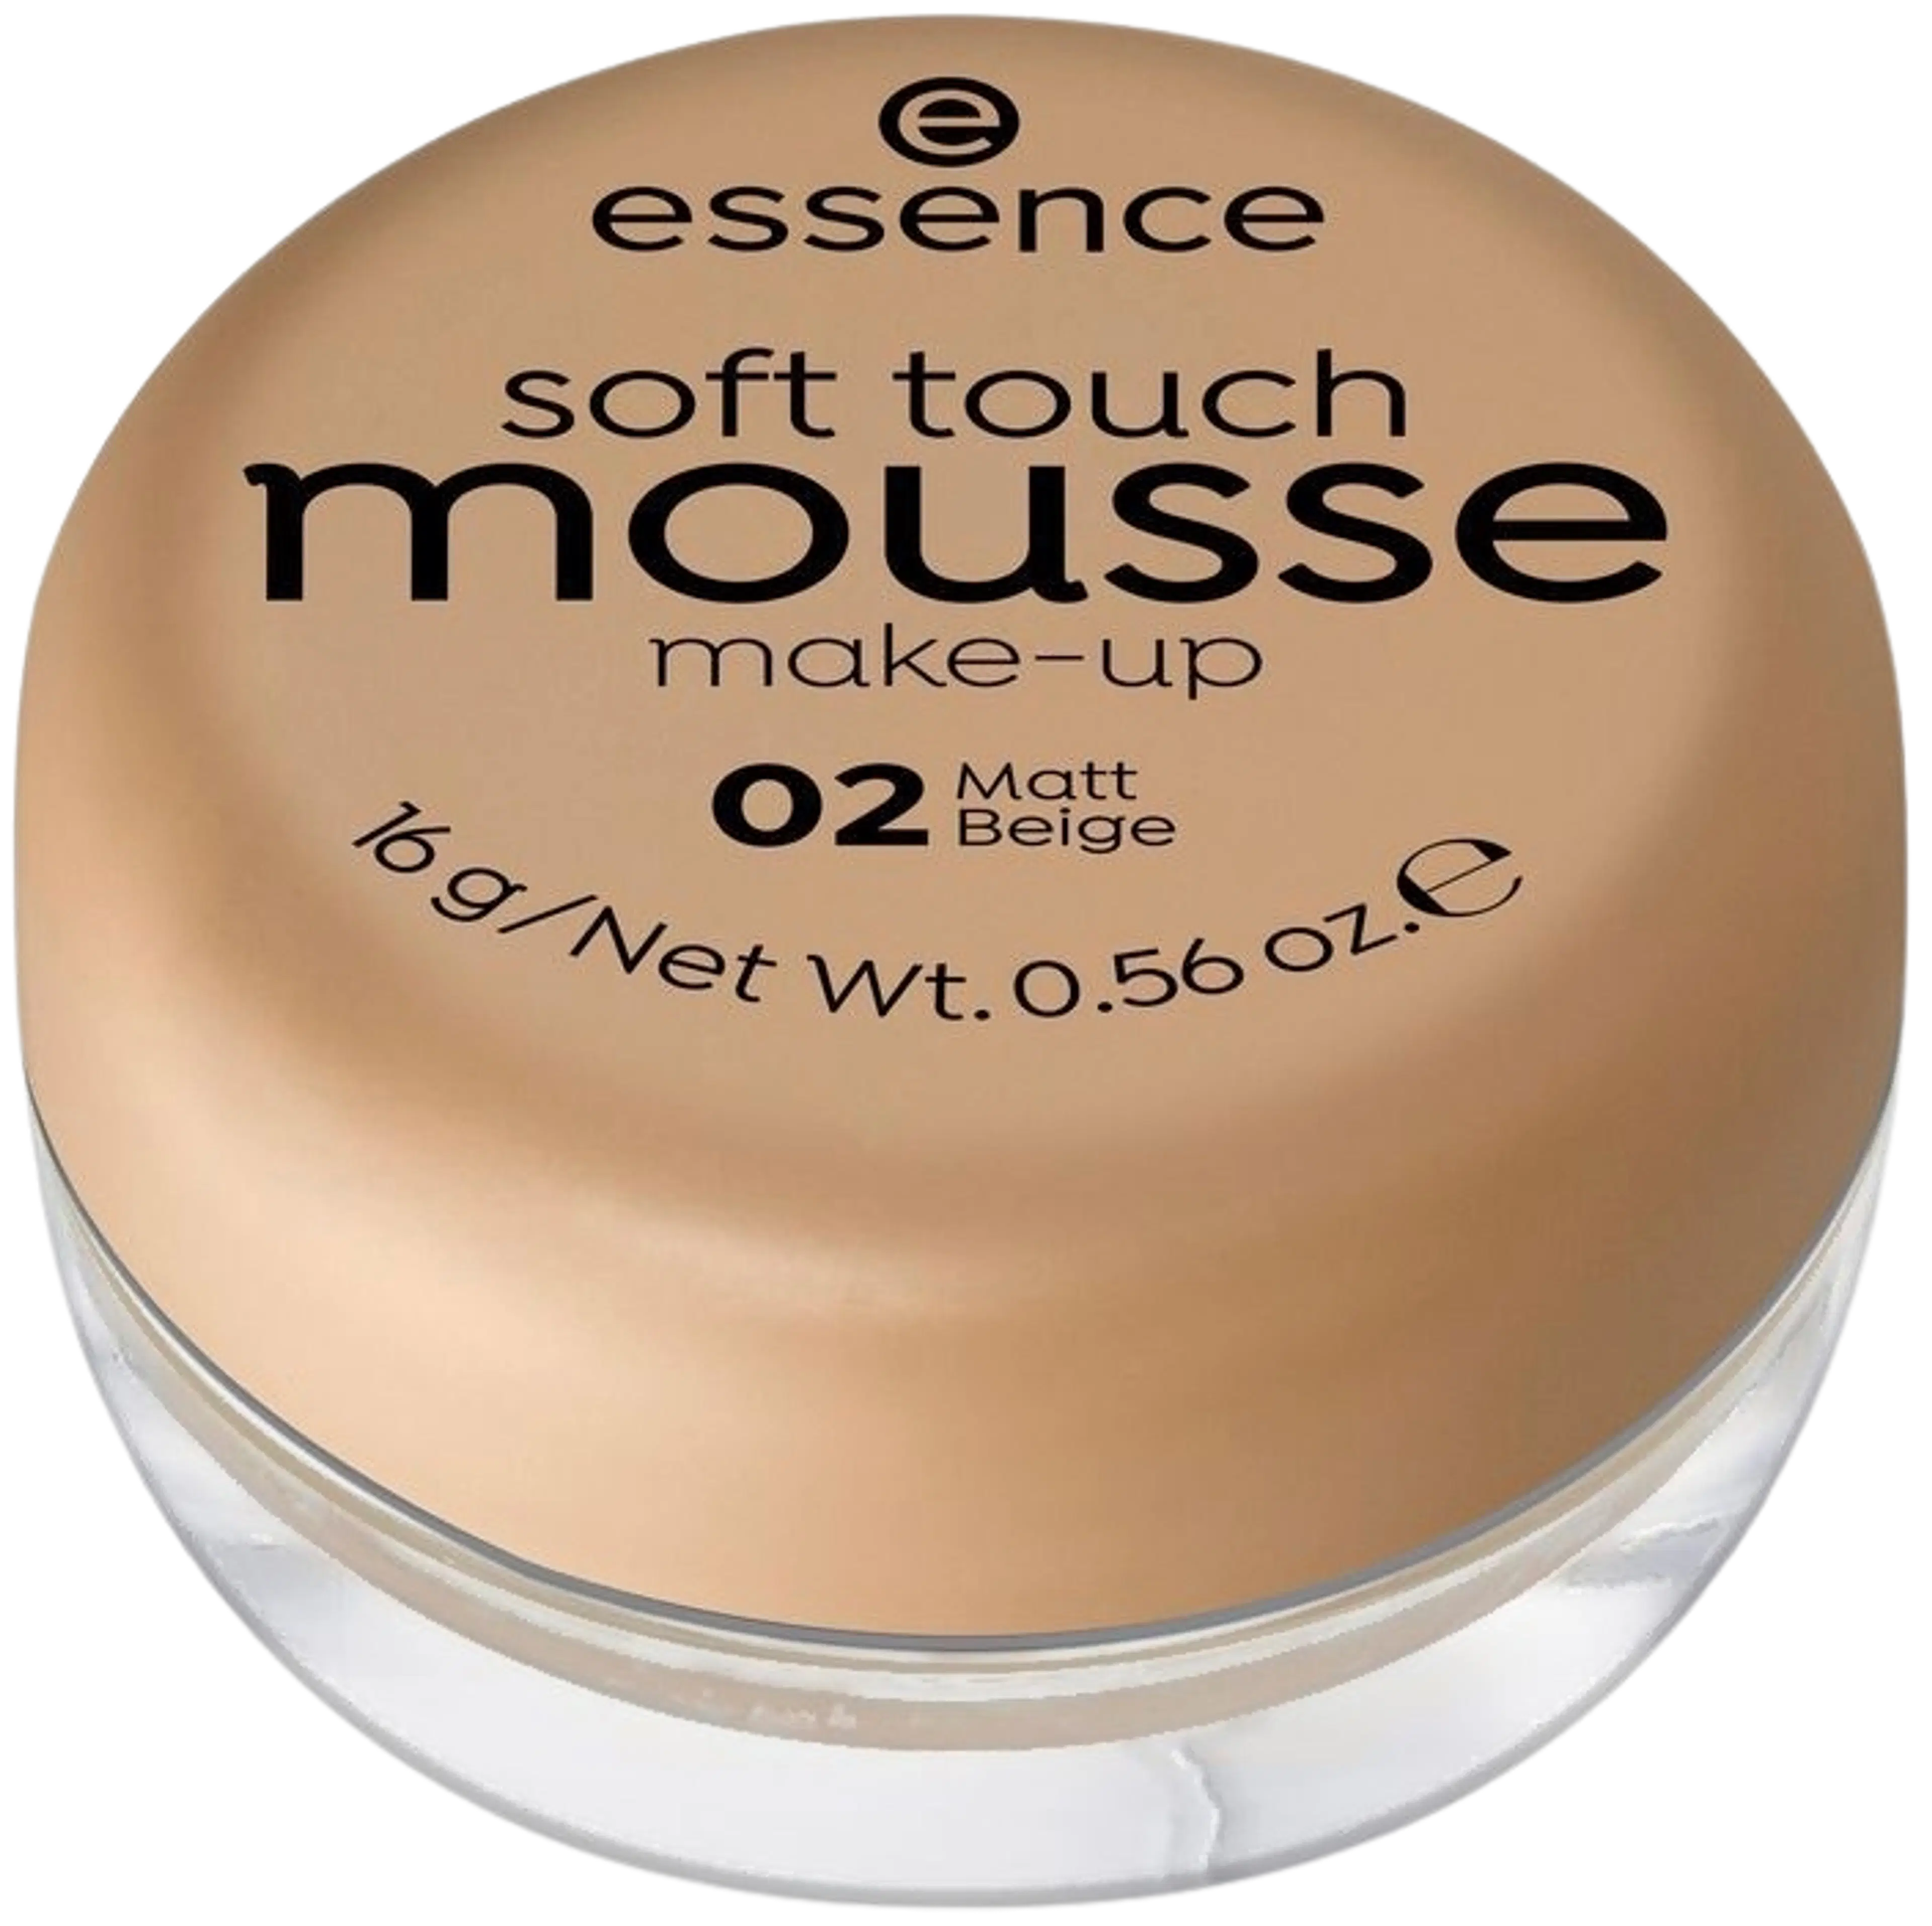 essence soft touch mousse make-up meikkivoide 16 g